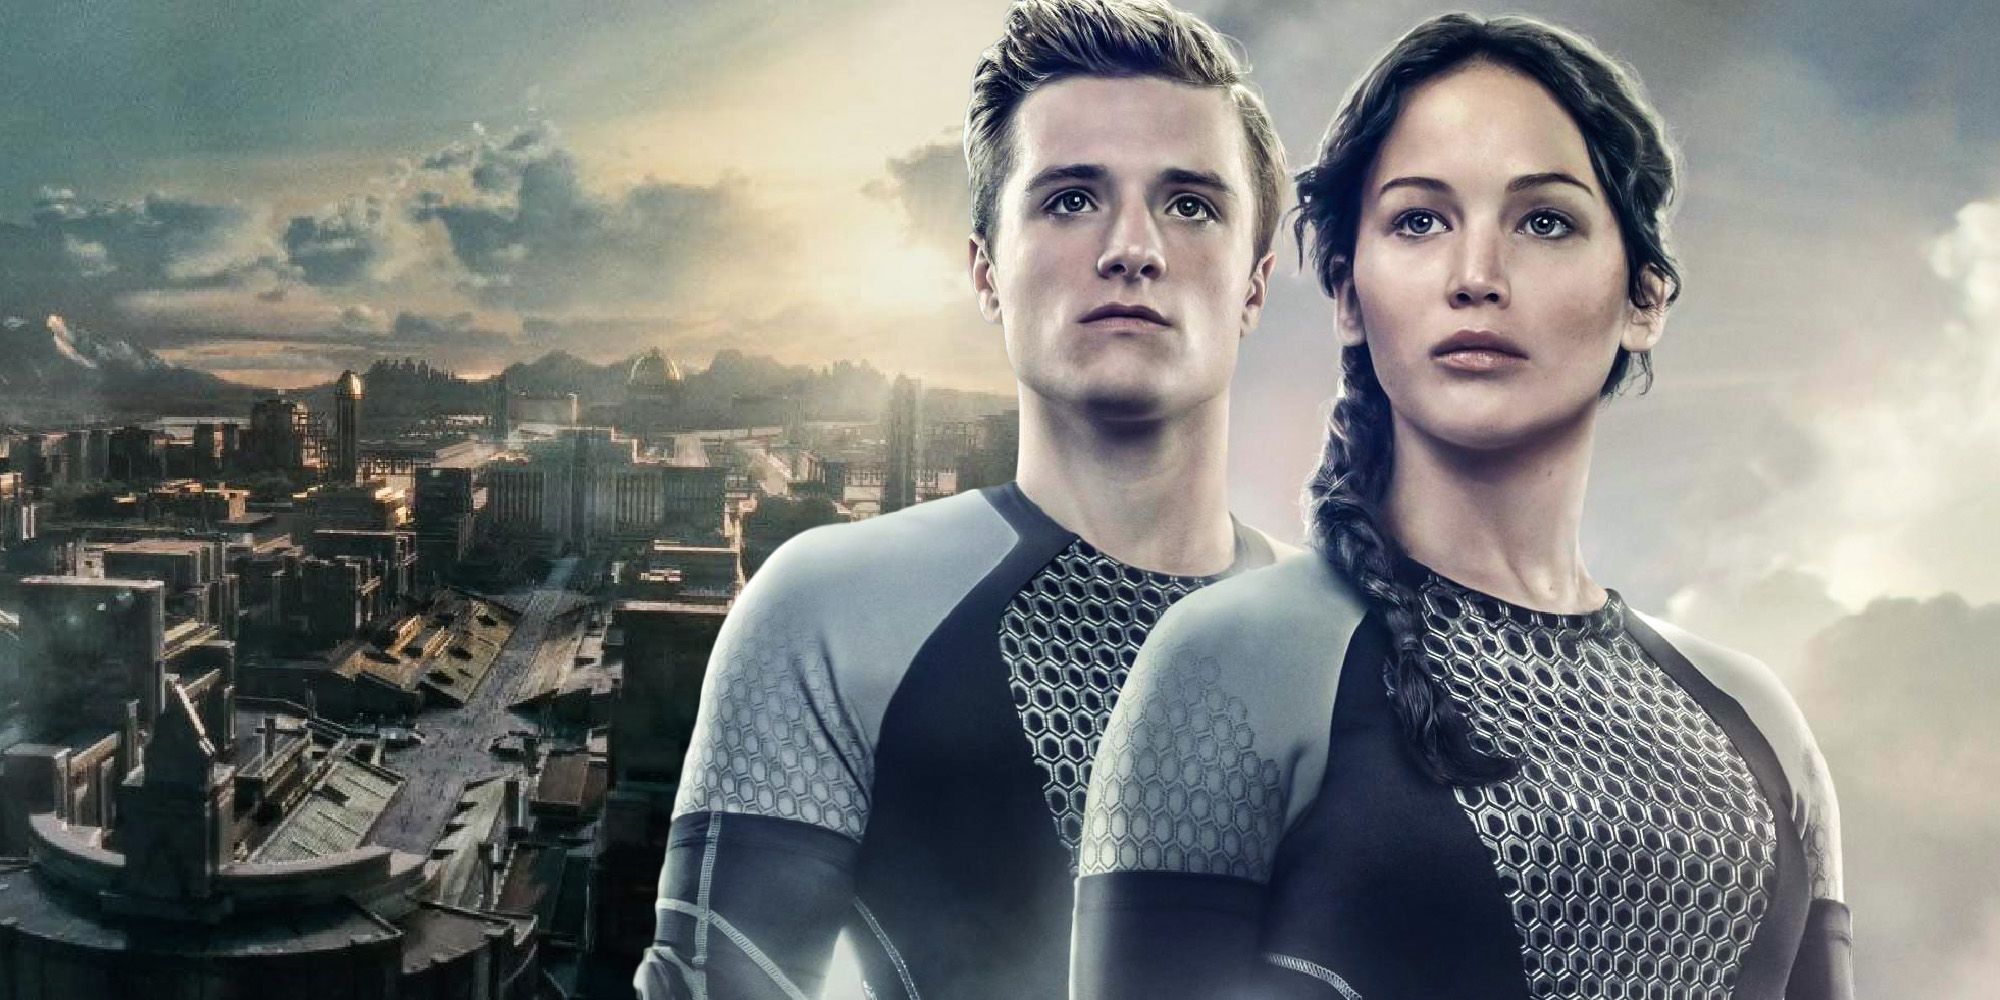 Katniss and Peeta with the Capitol in the background.